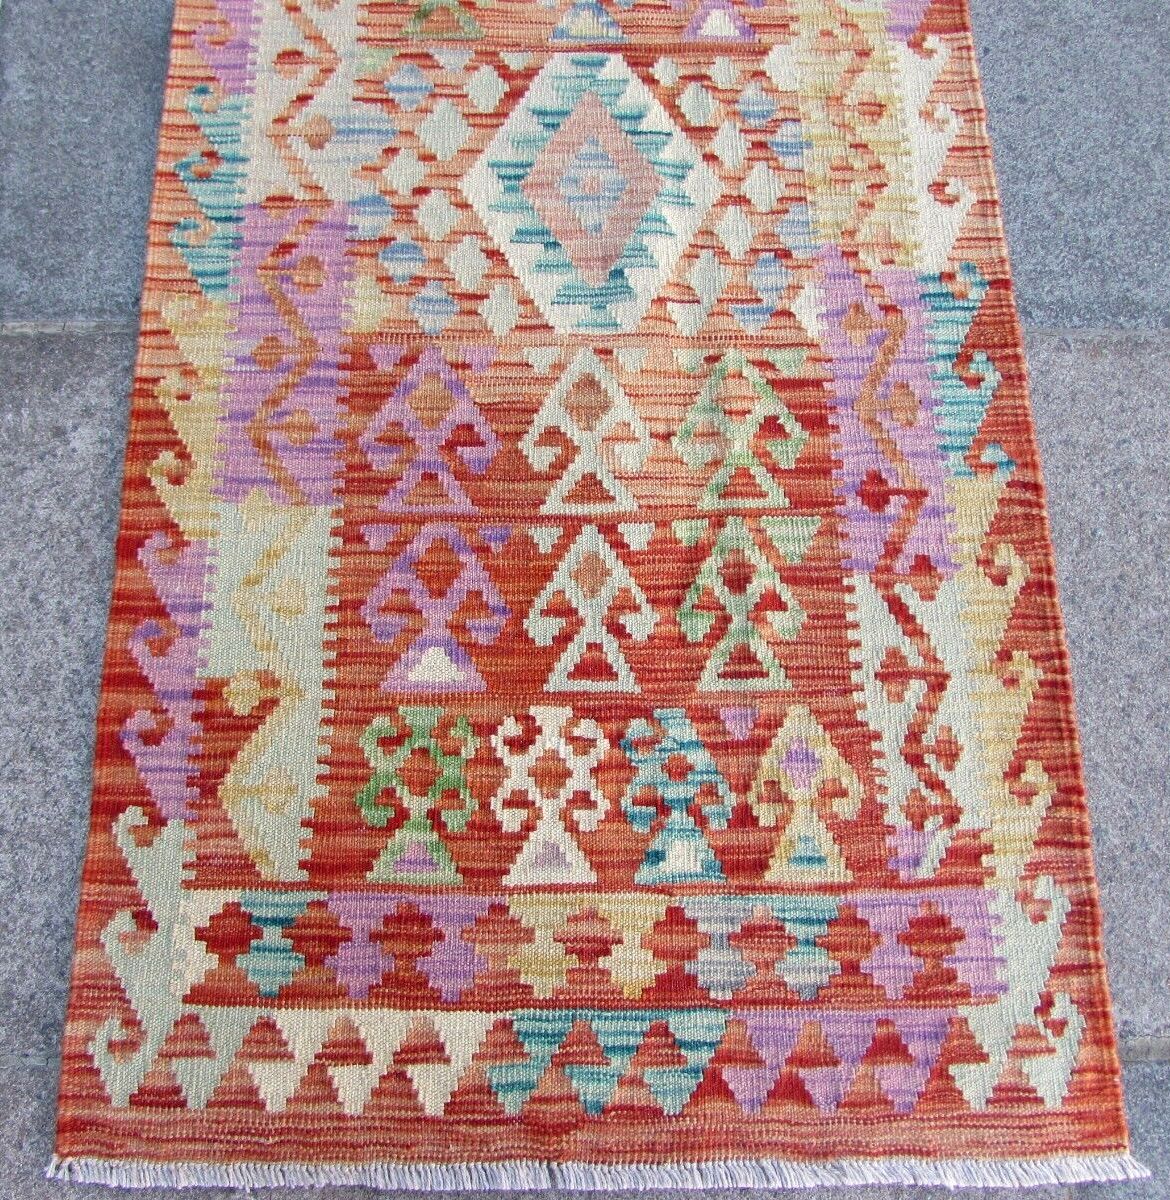 Intricately woven wool fibers in traditional kilim style